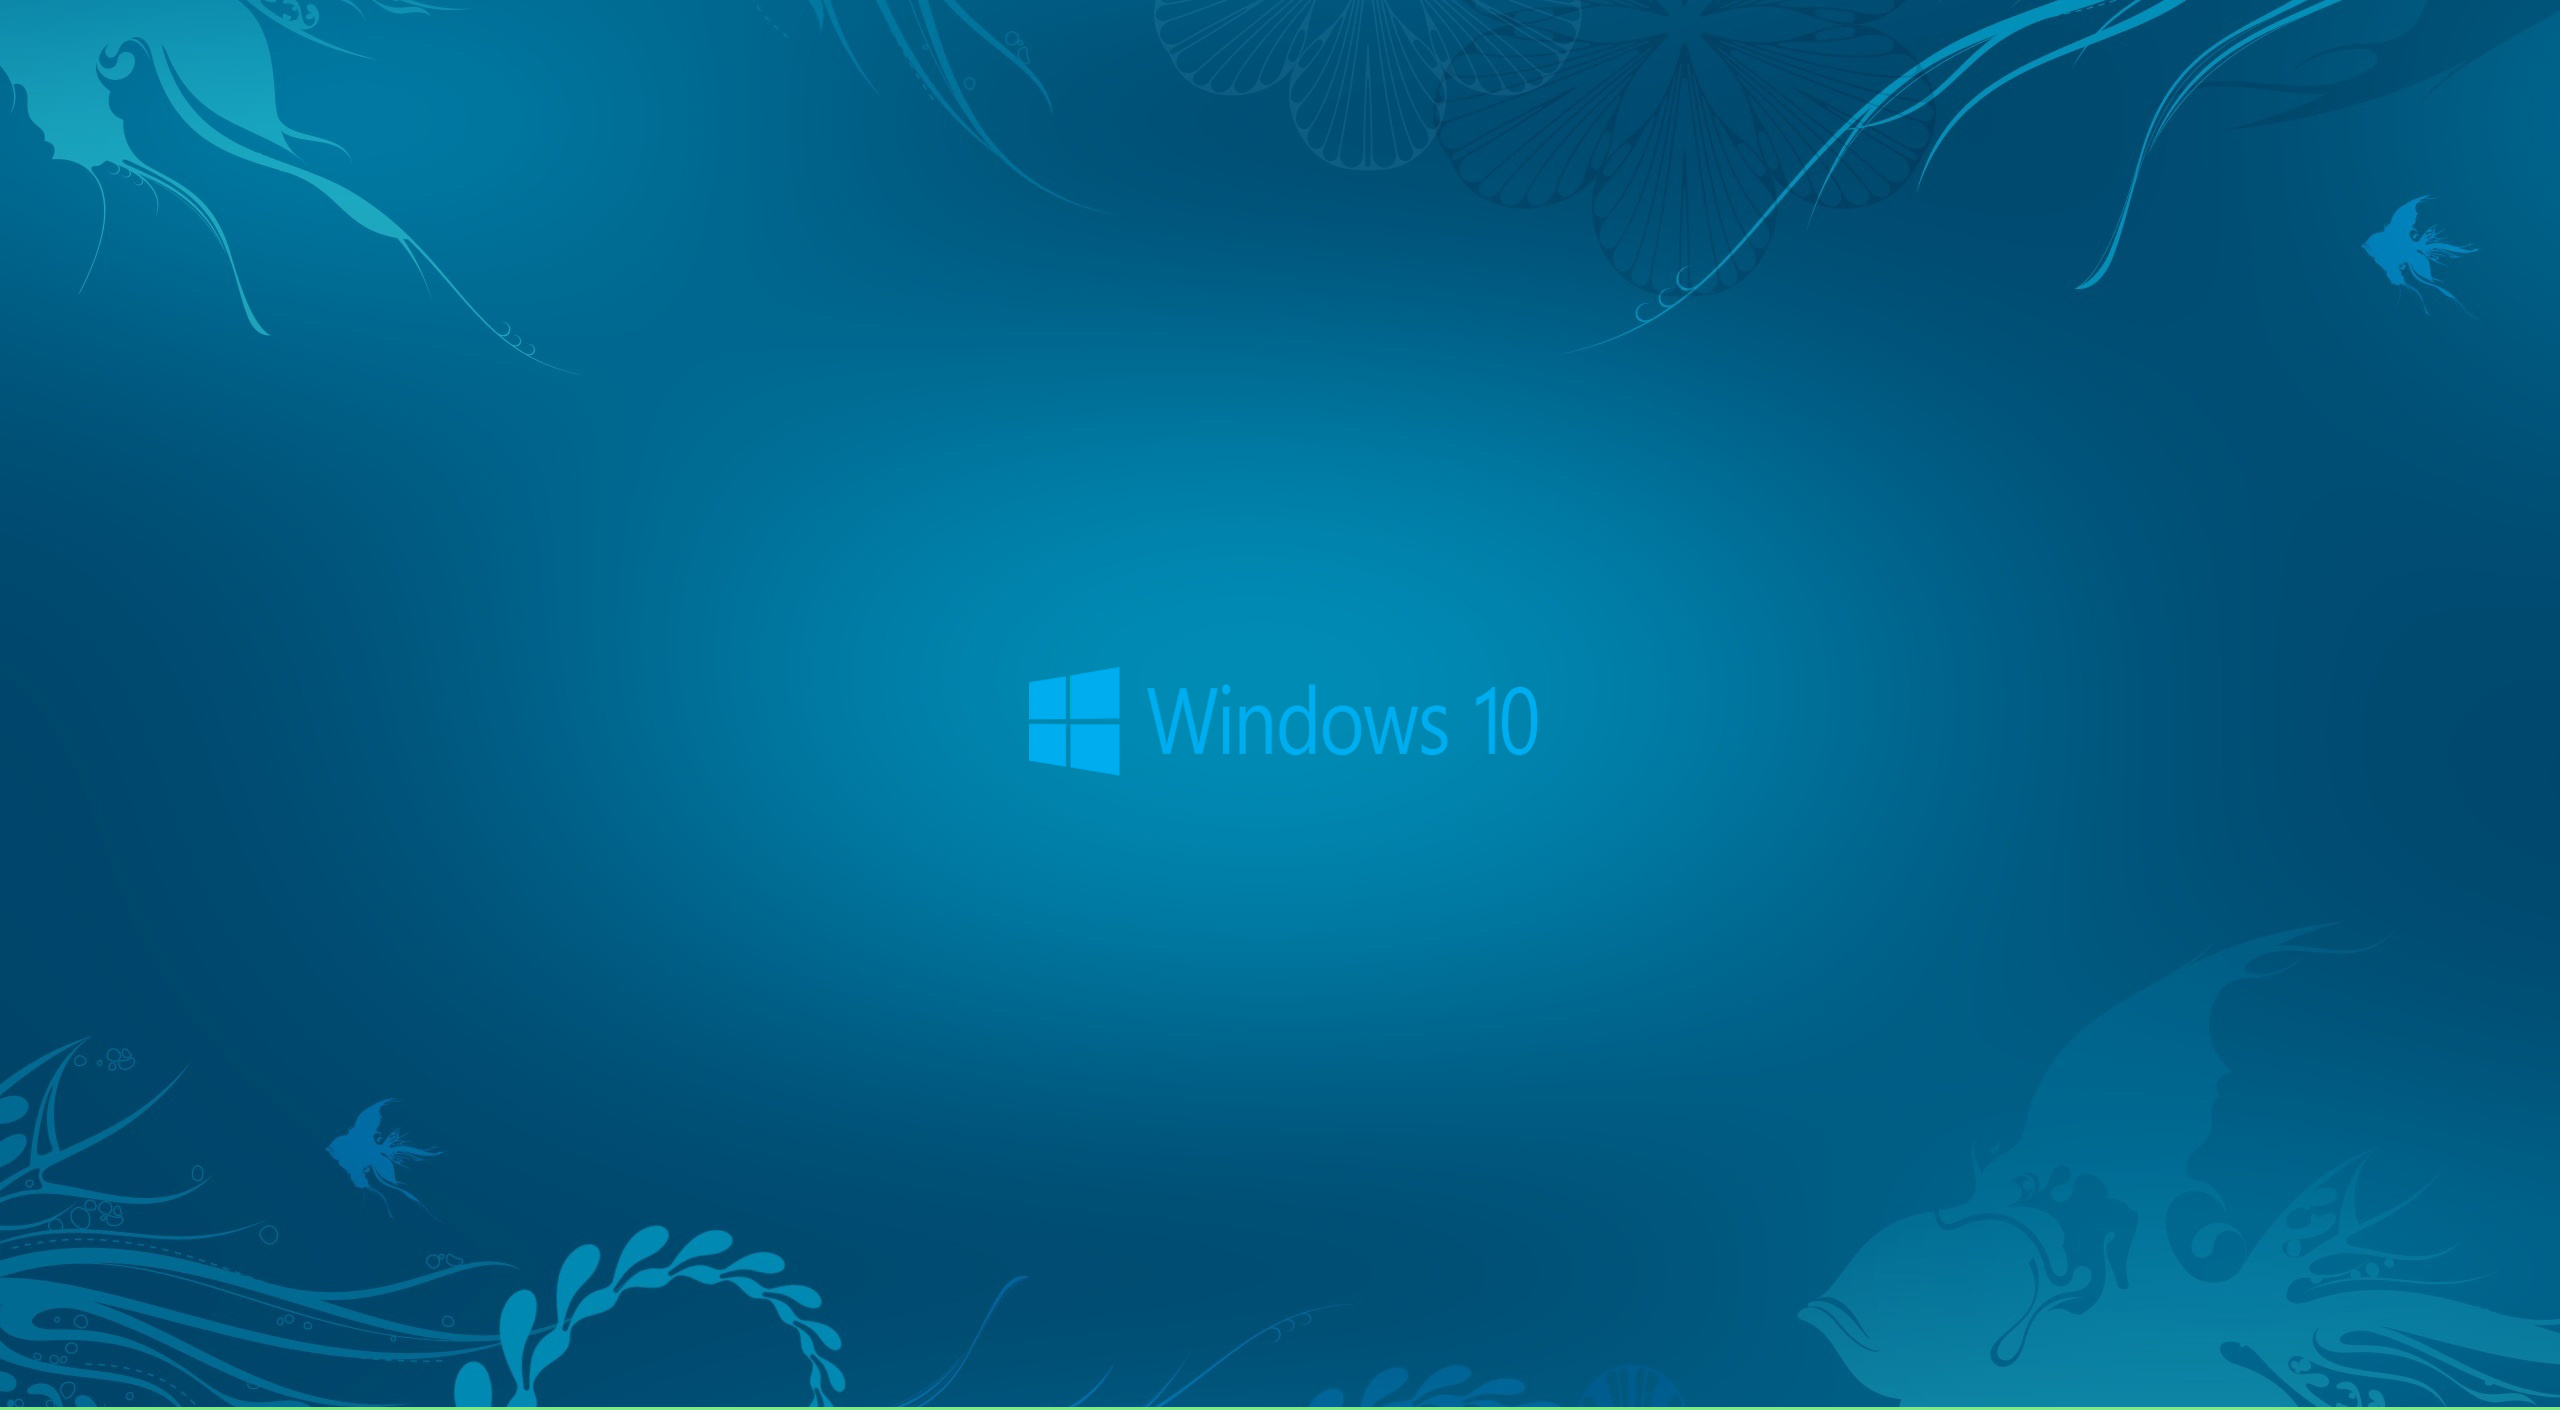 File Attachment For Windows Wallpaper With New Logo On Deep Blue